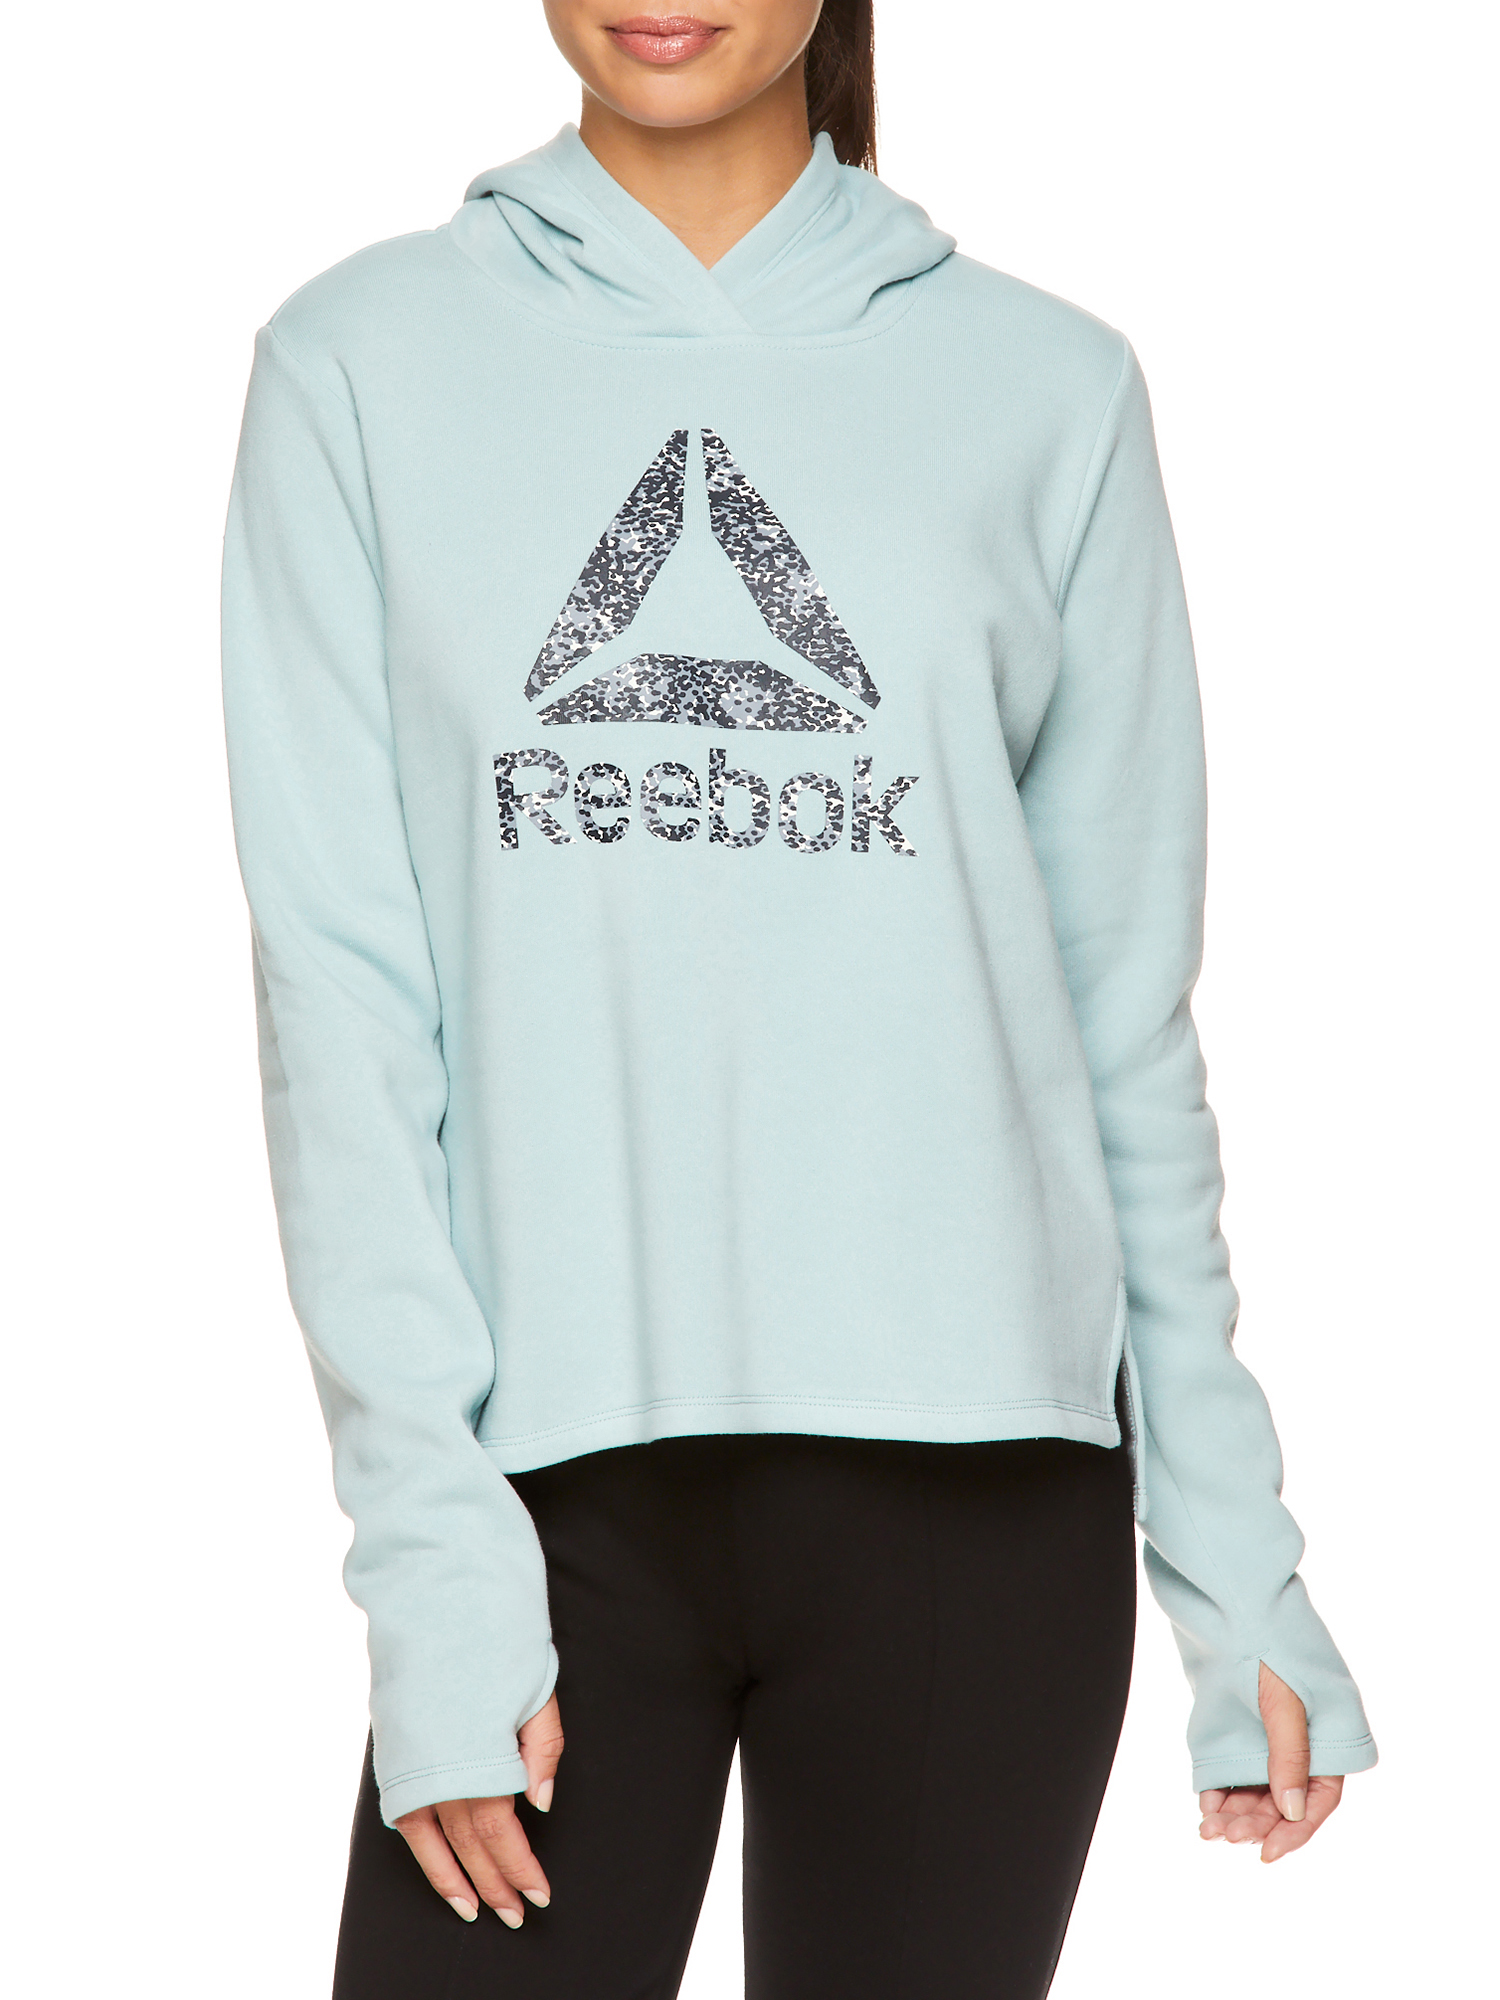 Reebok Womens Side Slit Hoodie with Graphic - image 1 of 4